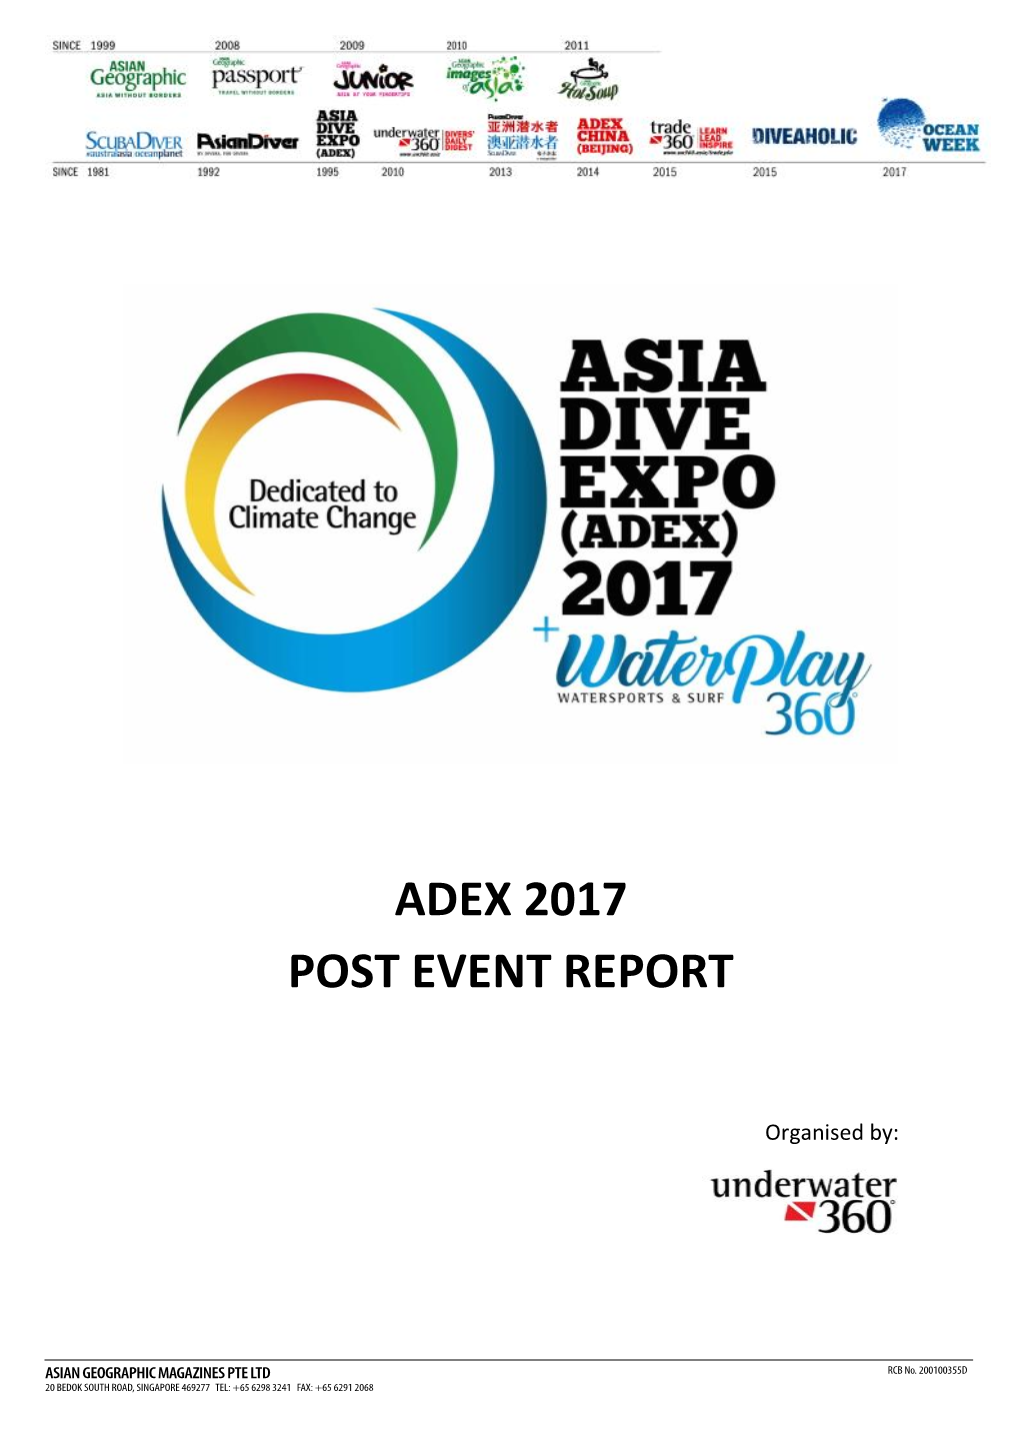 View ADEX 2017 Post Event Report